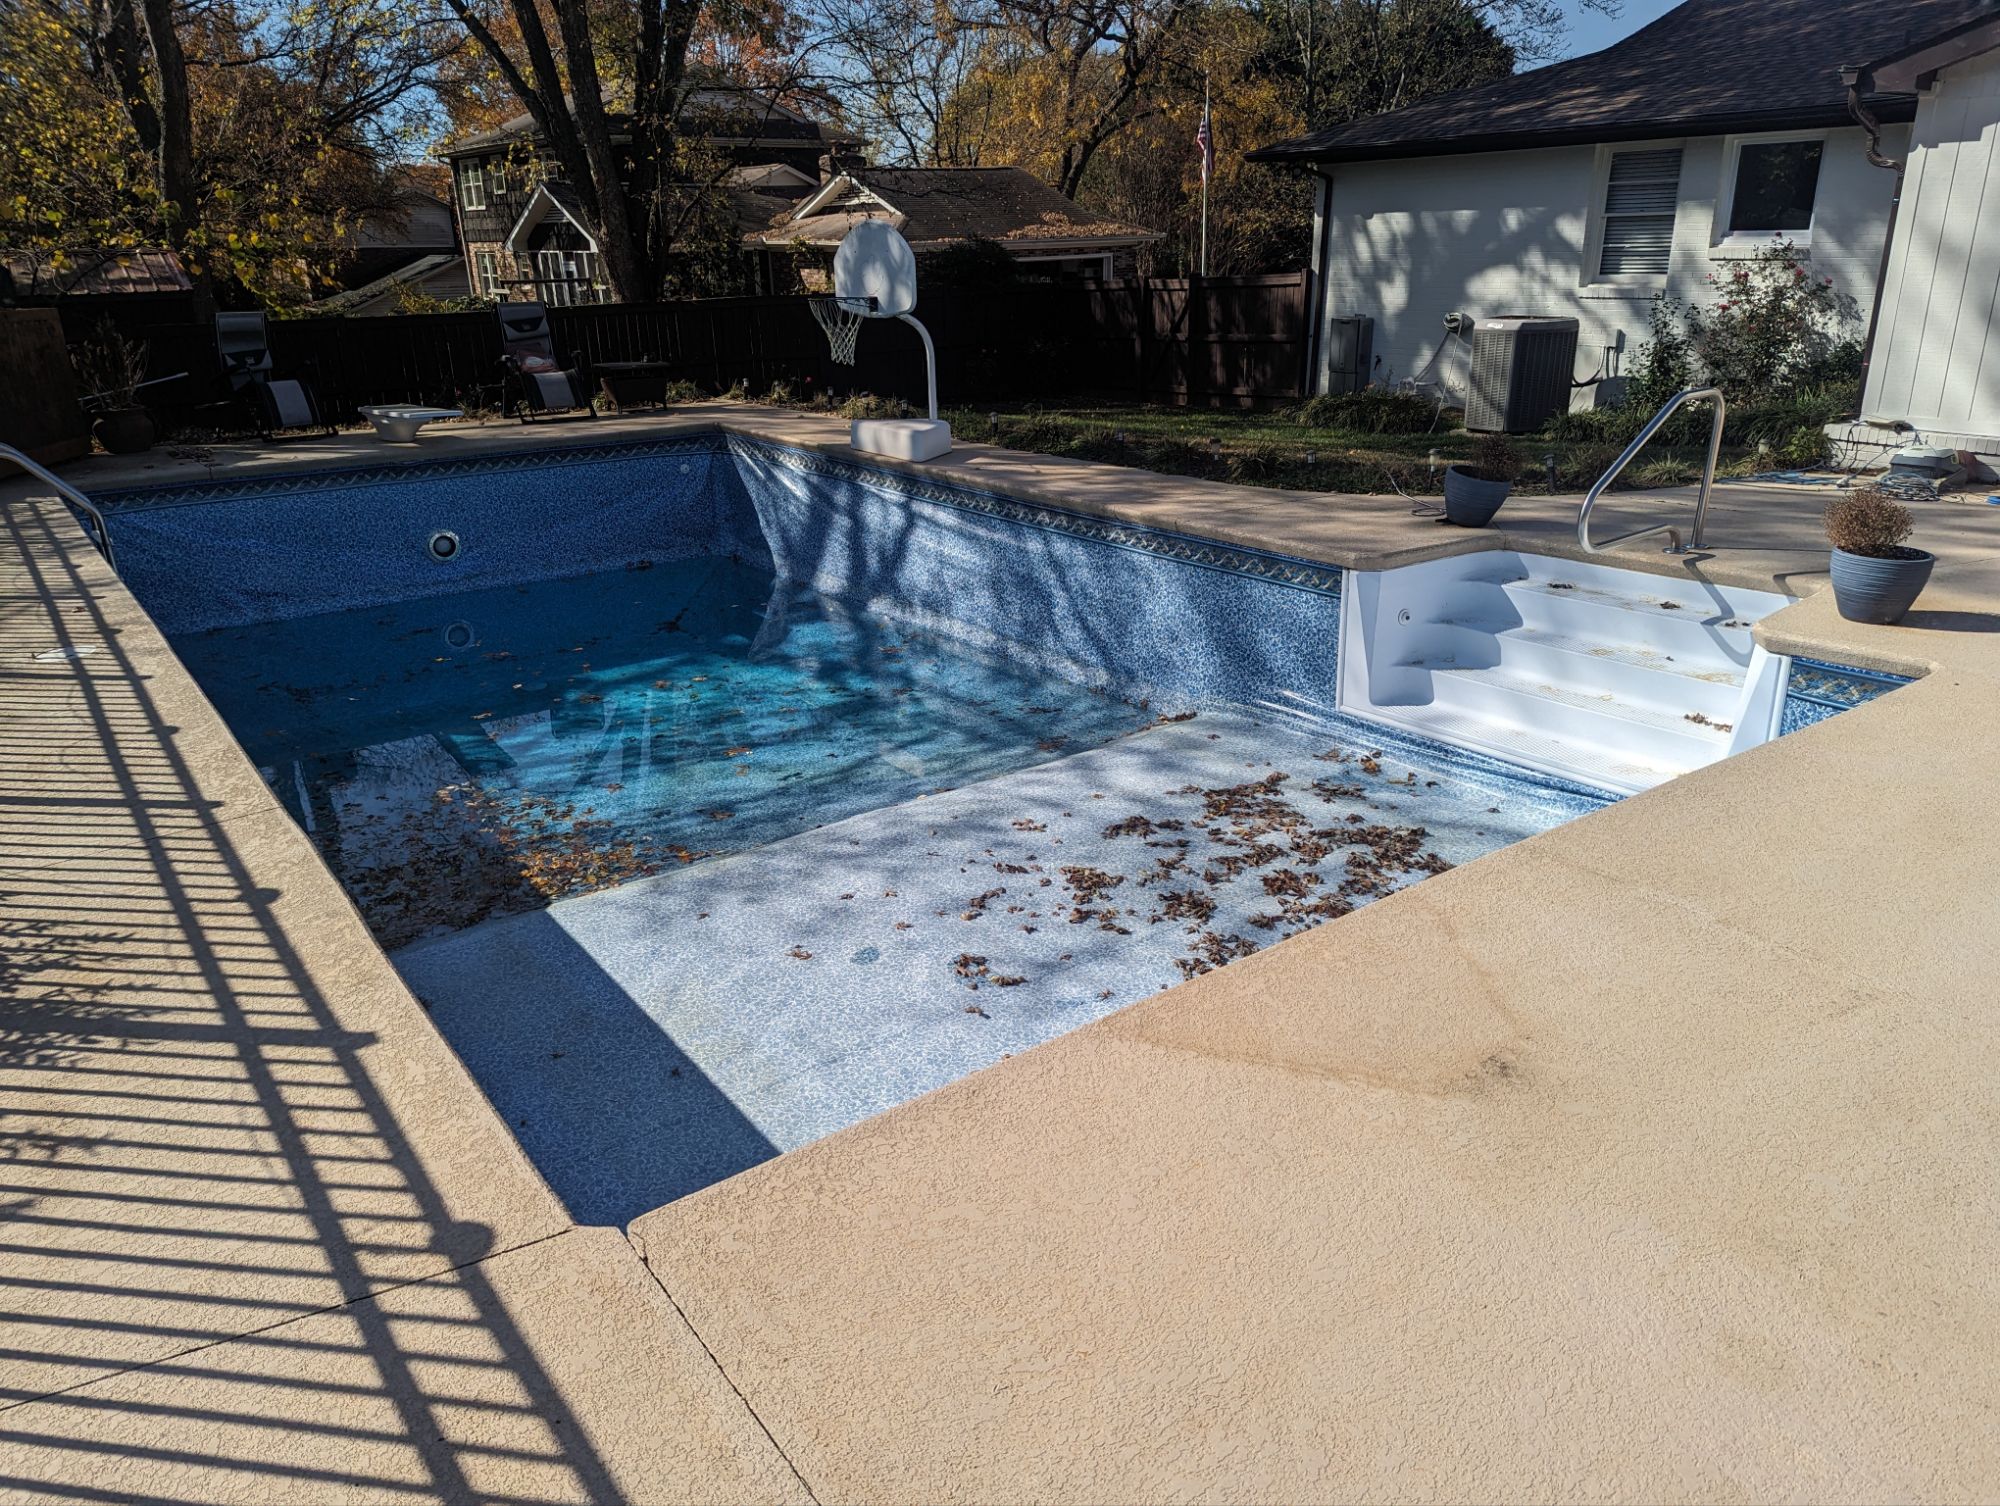 Leaking vinyl liner swimming pool with no water in shallow end